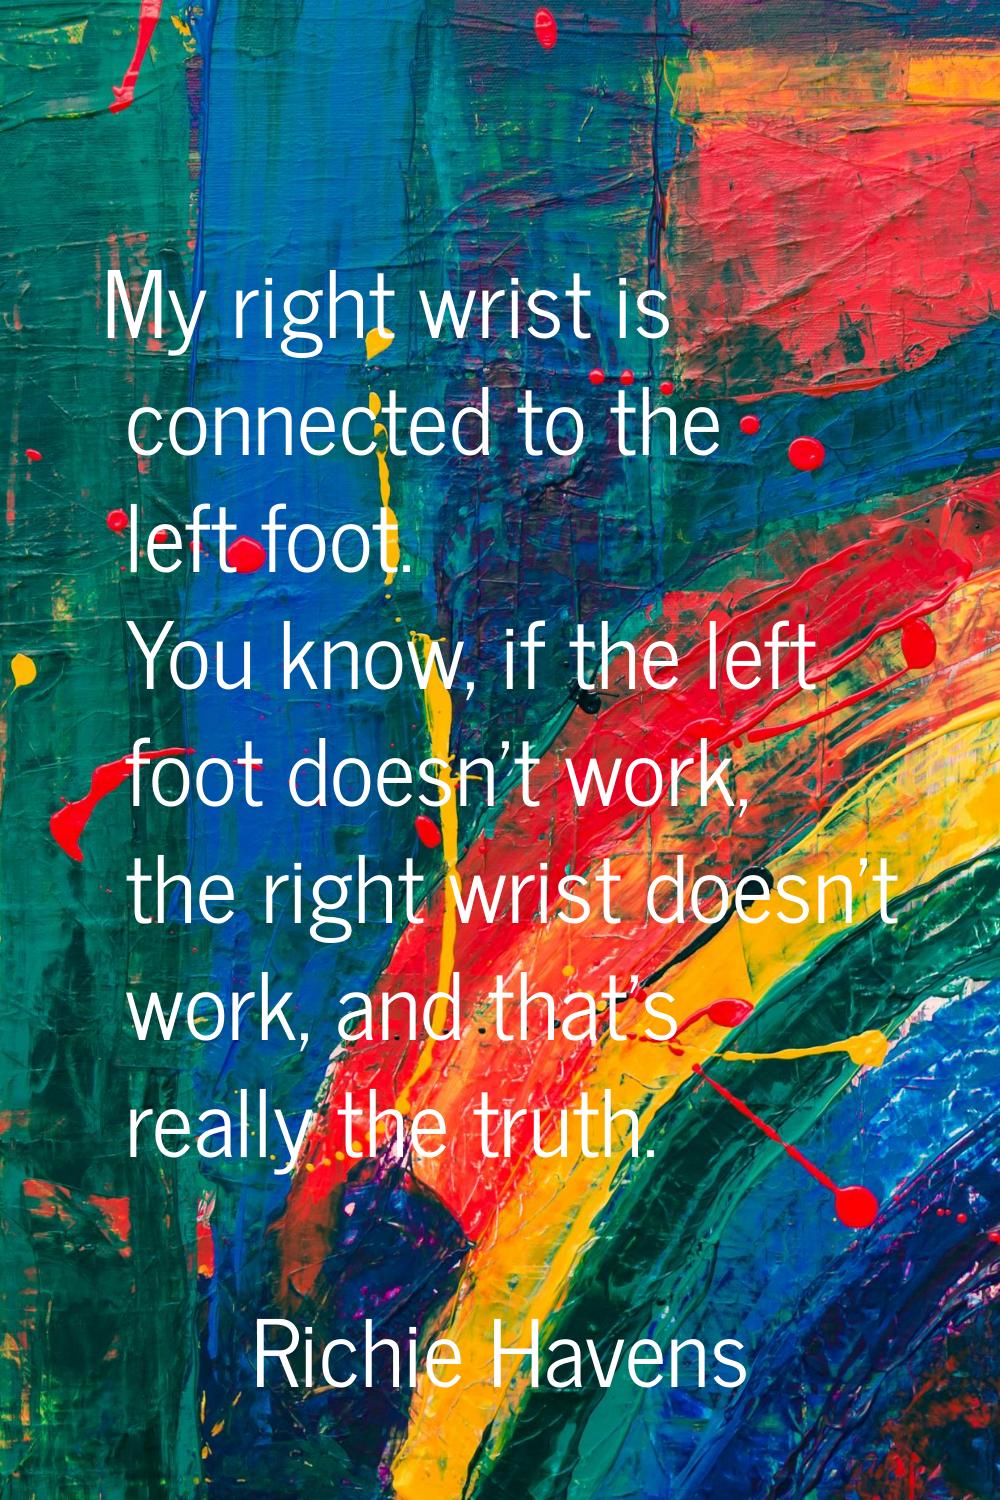 My right wrist is connected to the left foot. You know, if the left foot doesn't work, the right wr